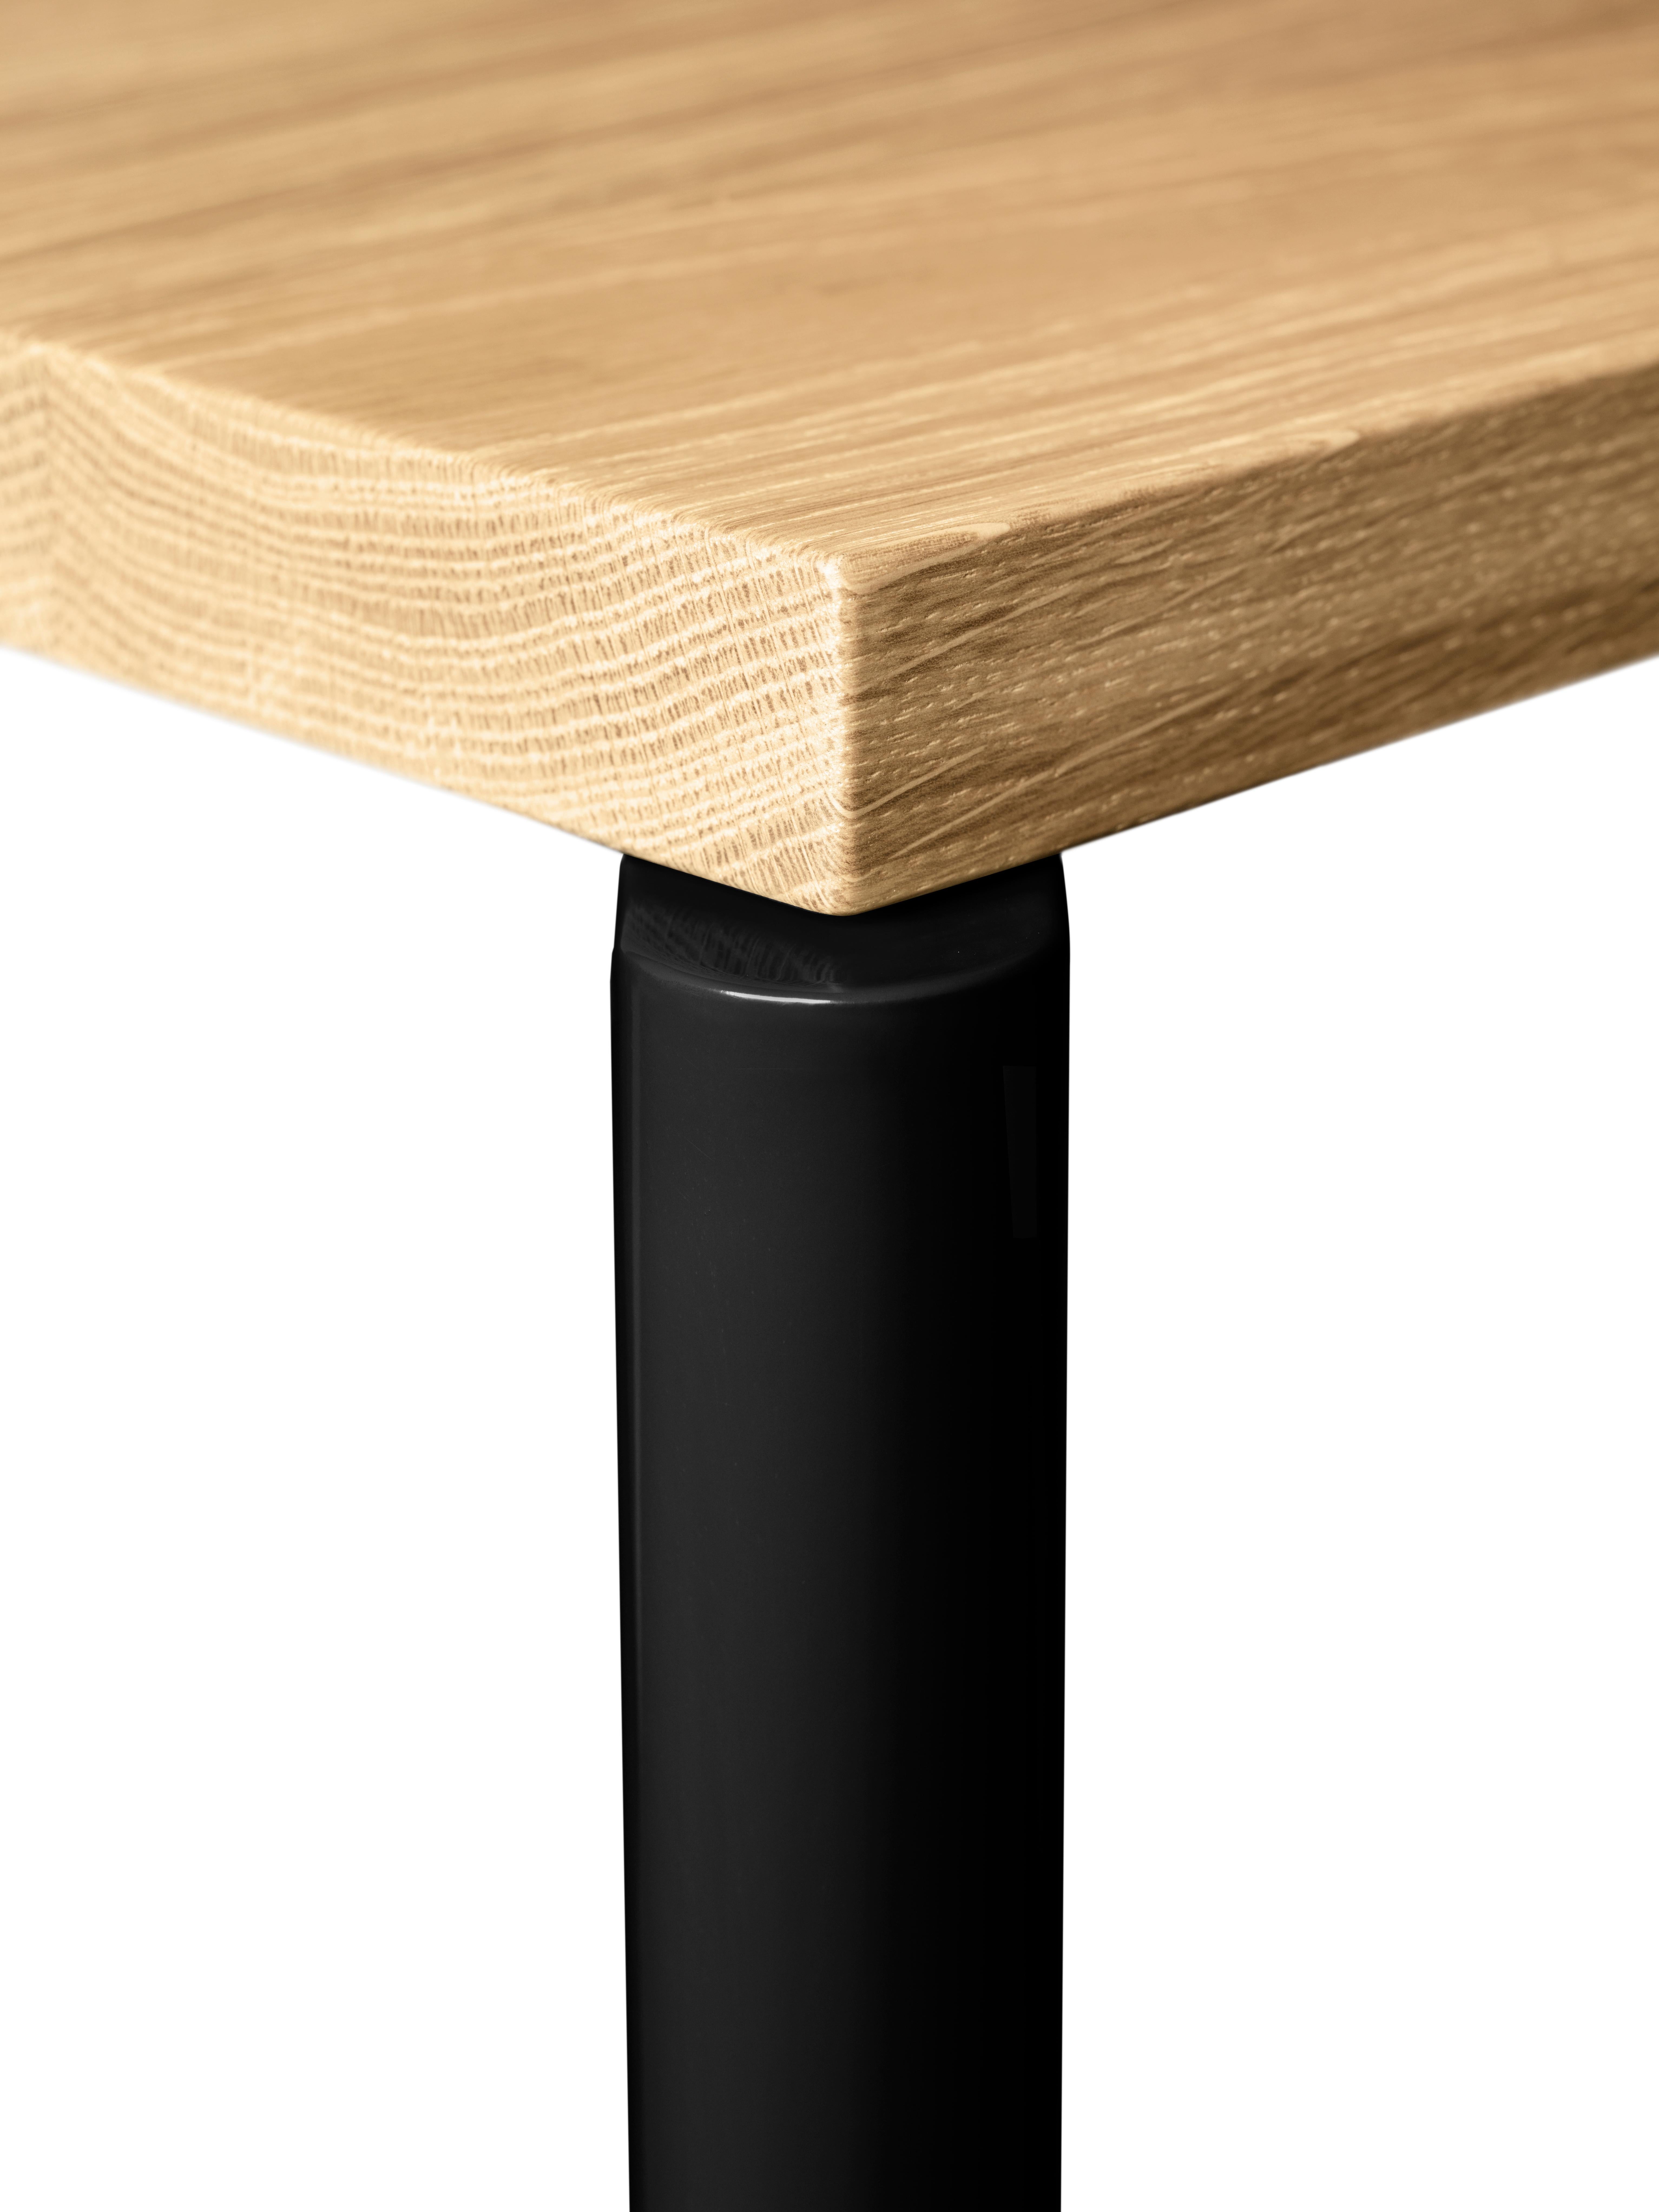 Swiss Vitra Flavigny Table in American Walnut by Jean Prouvé